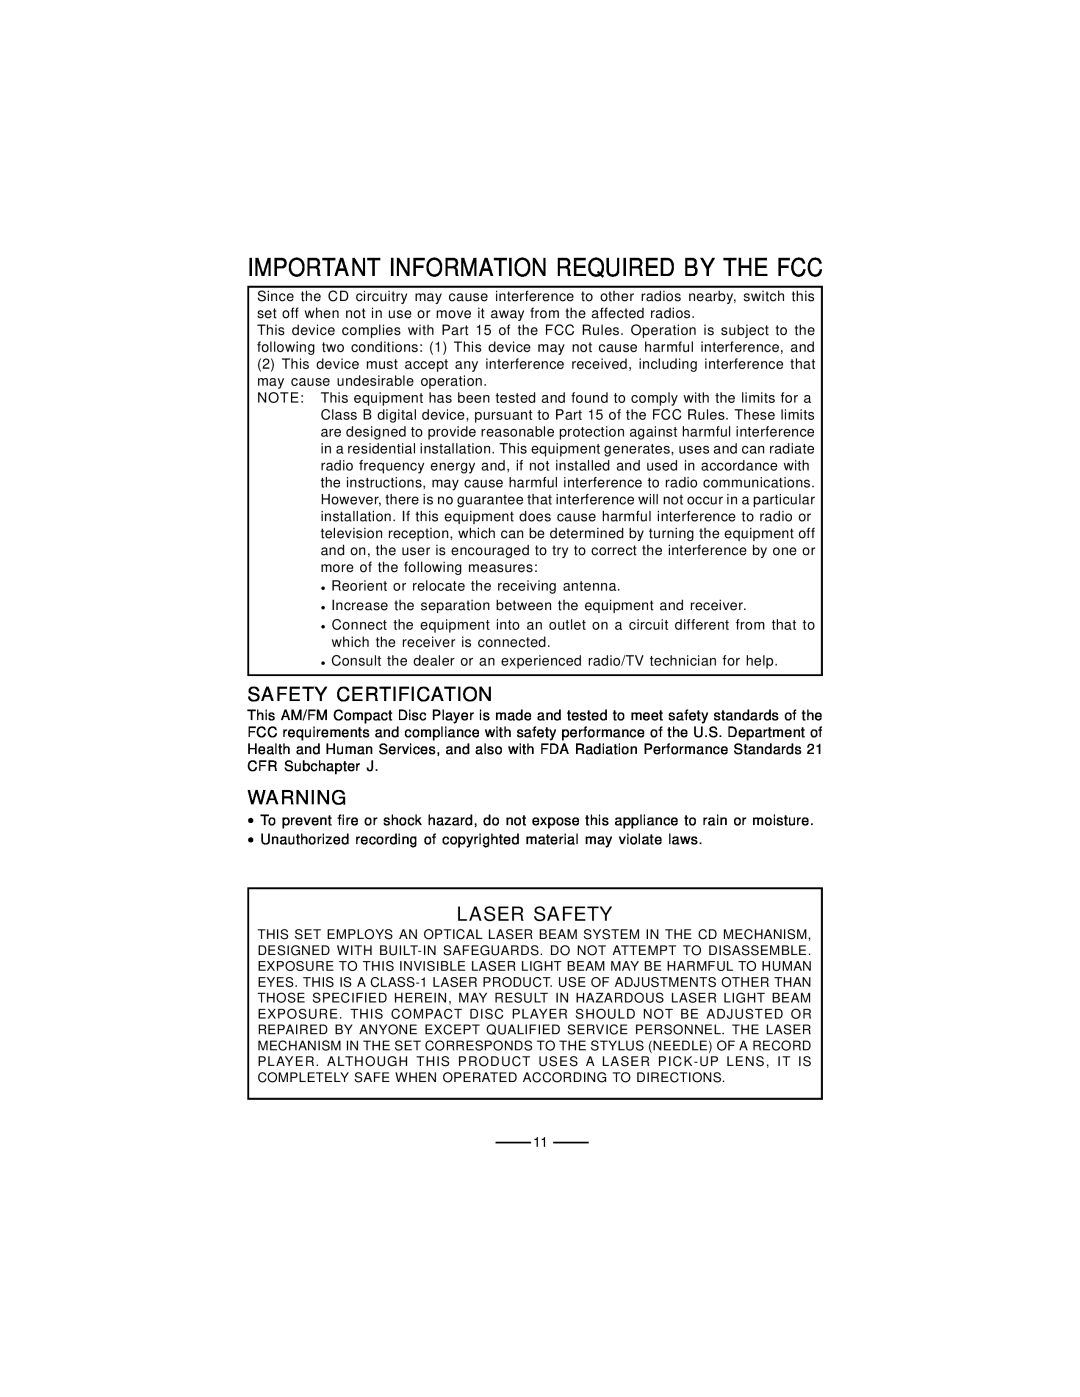 Lenoxx Electronics CD-61 Important Information Required By The Fcc, Safety Certification, Laser Safety 